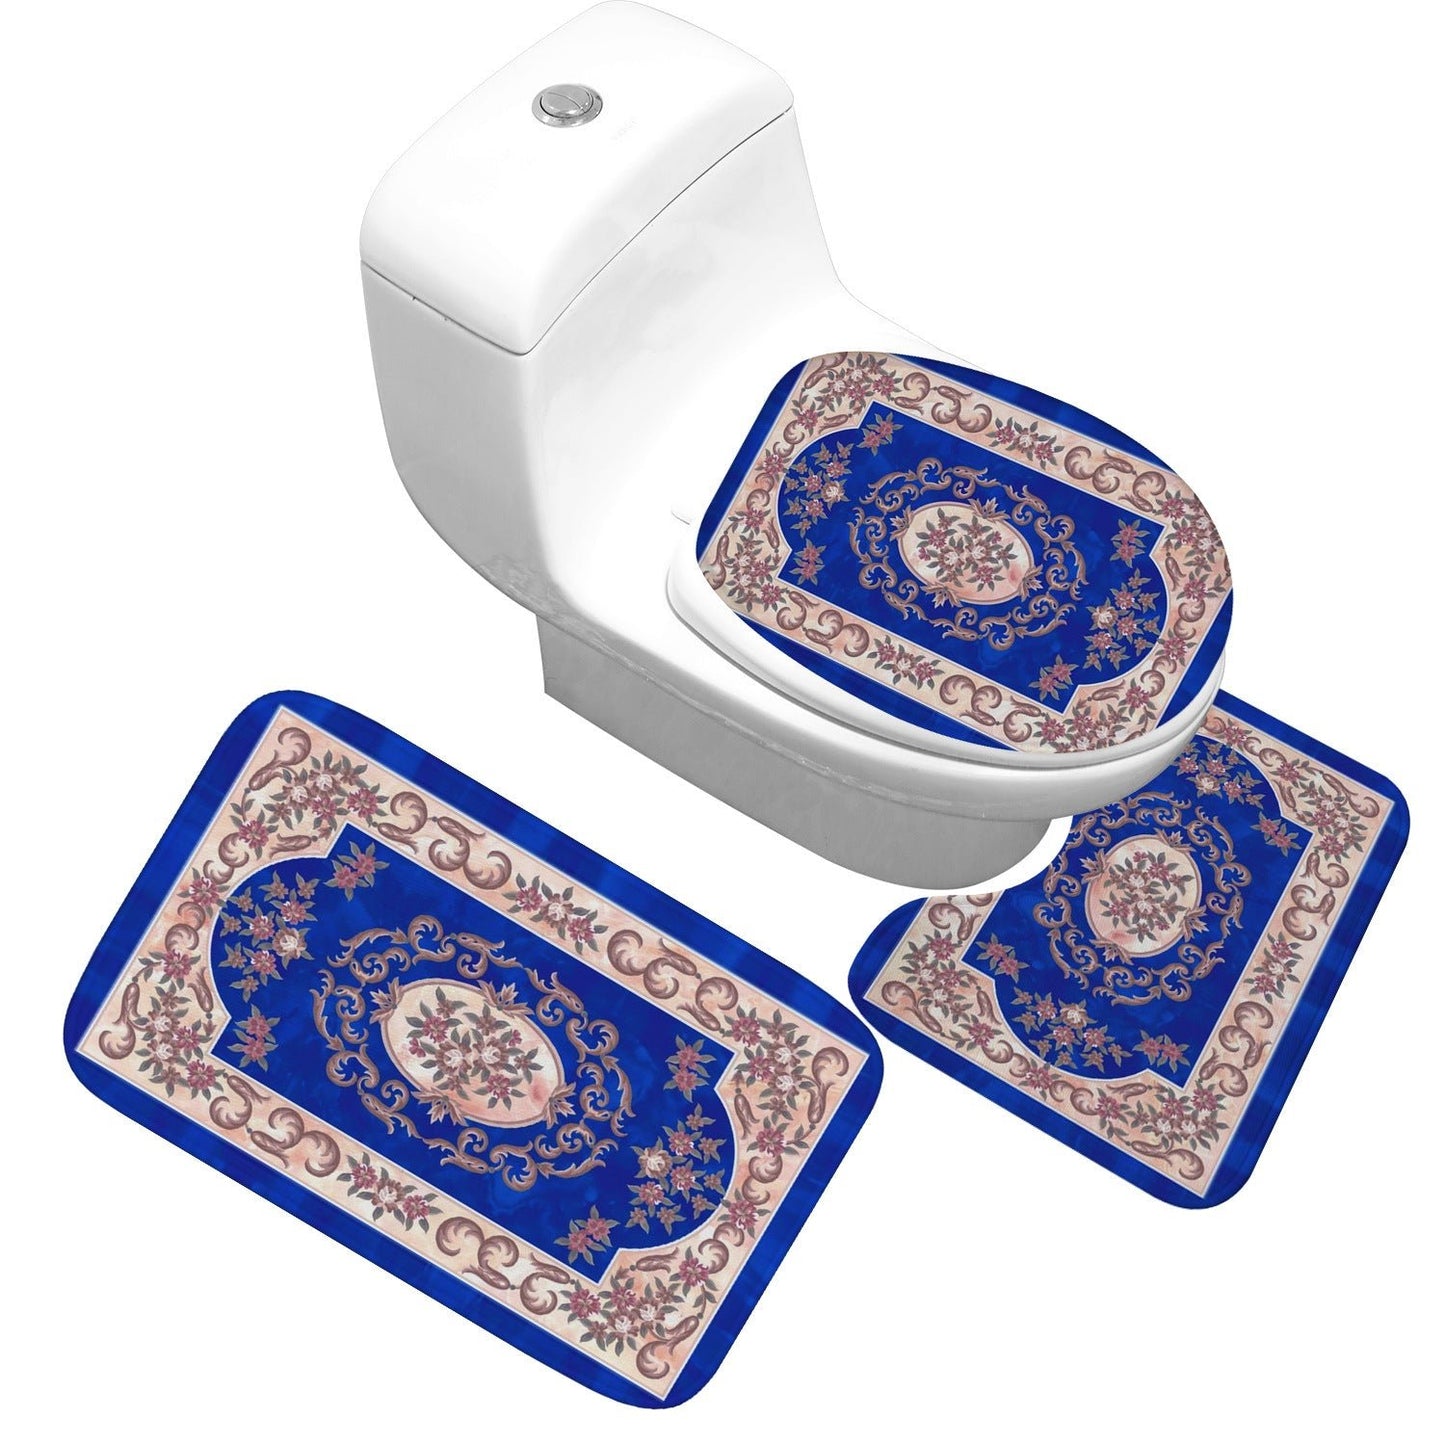 Receiving Bag Three-piece Toilet Bathroom Toilet Carpet Non-slip Absorbent Toilet Floor Mat Classic Pattern | Decor Gifts and More